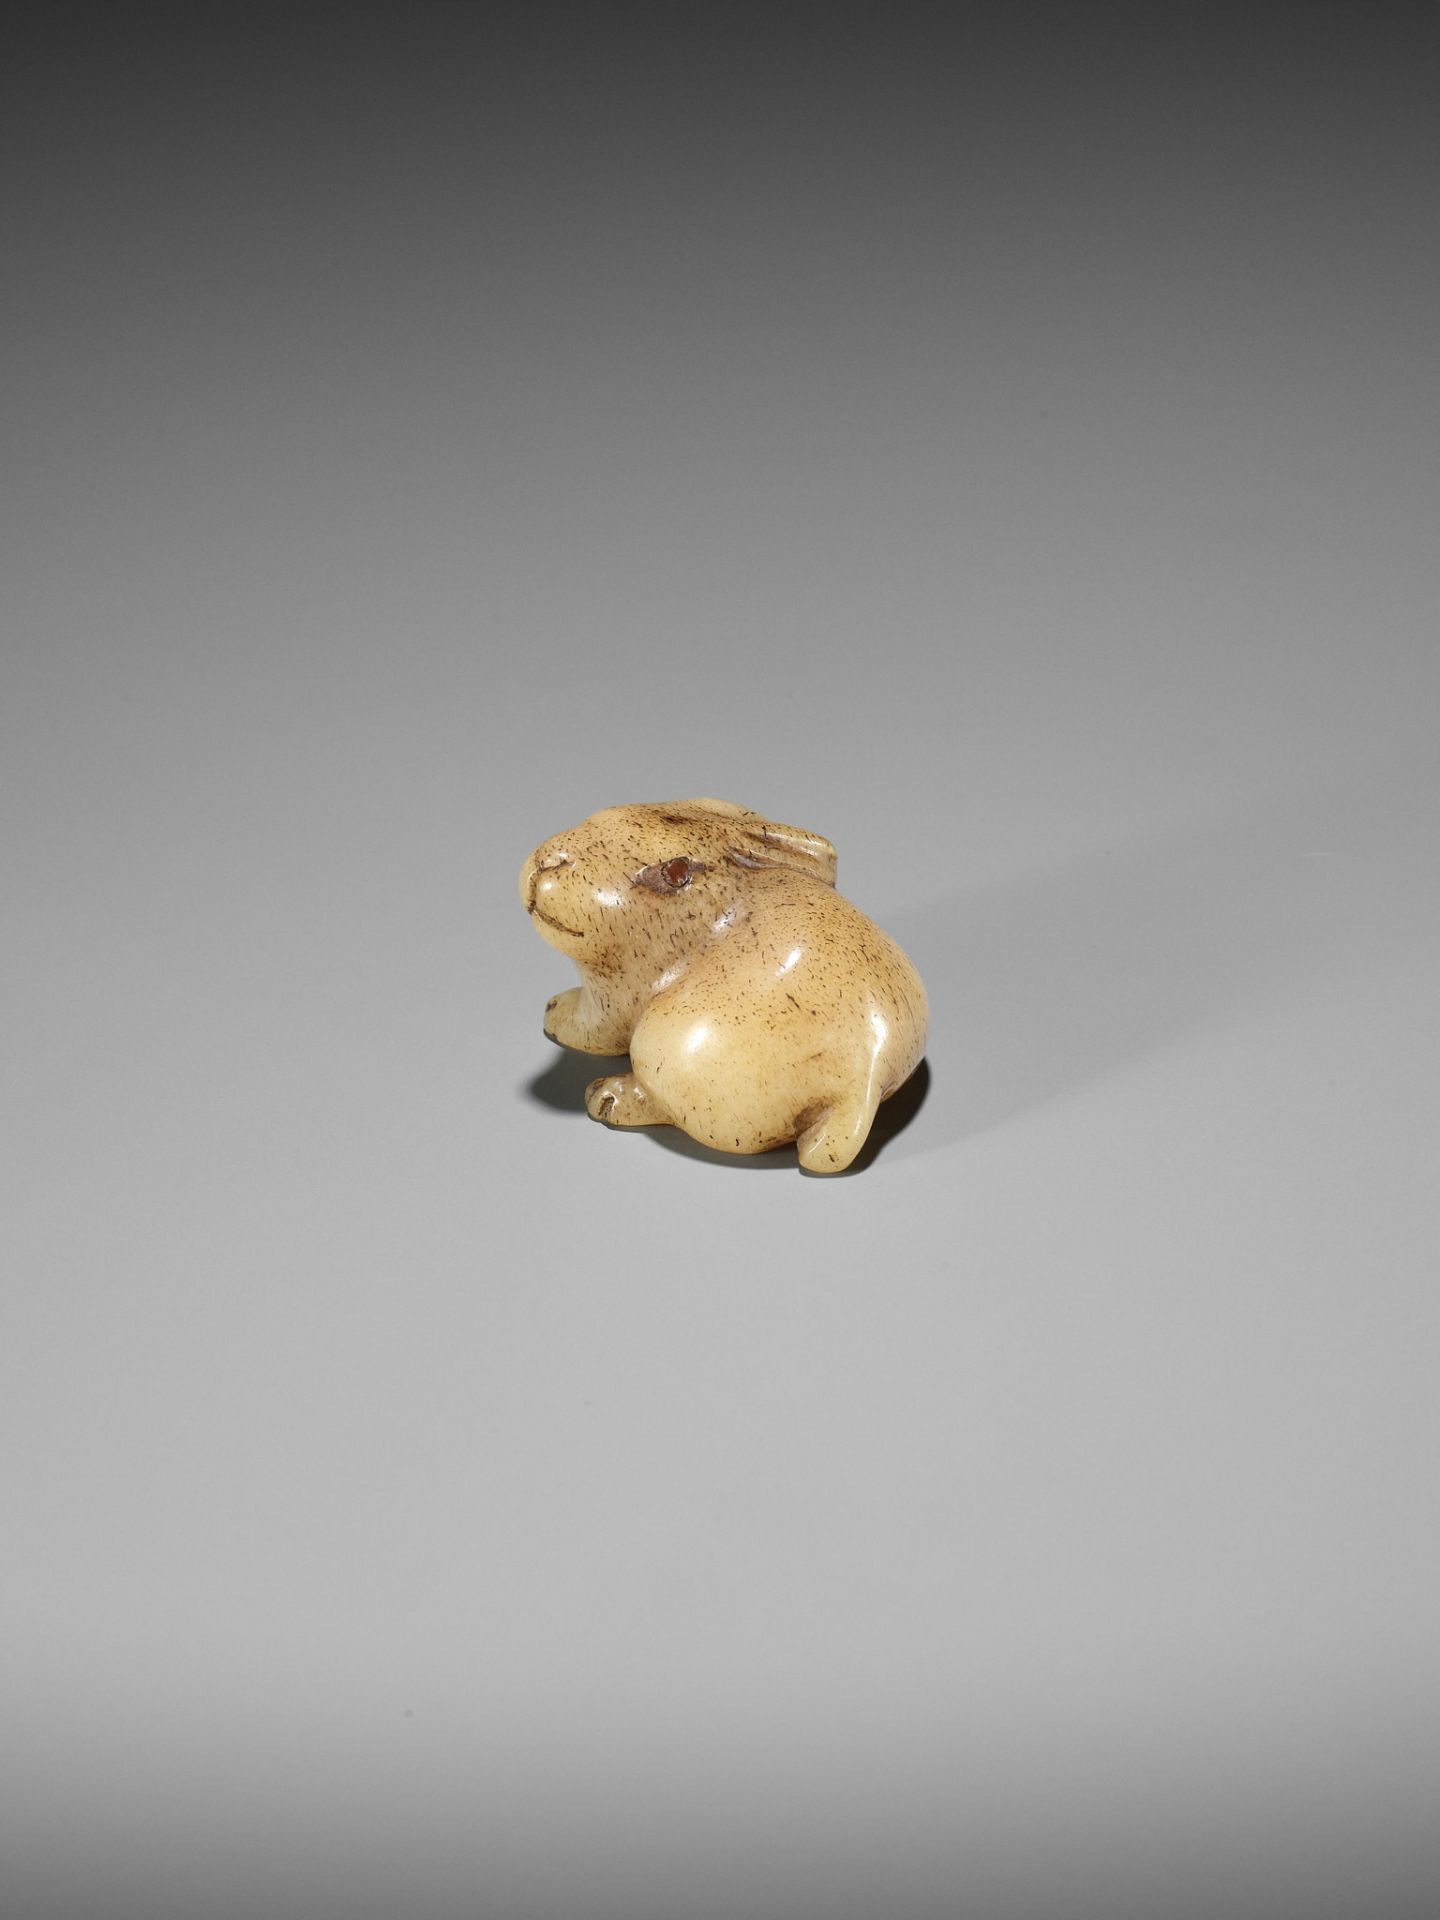 A CHARMING STAG ANTLER NETSUKE OF A HARE - Image 3 of 10